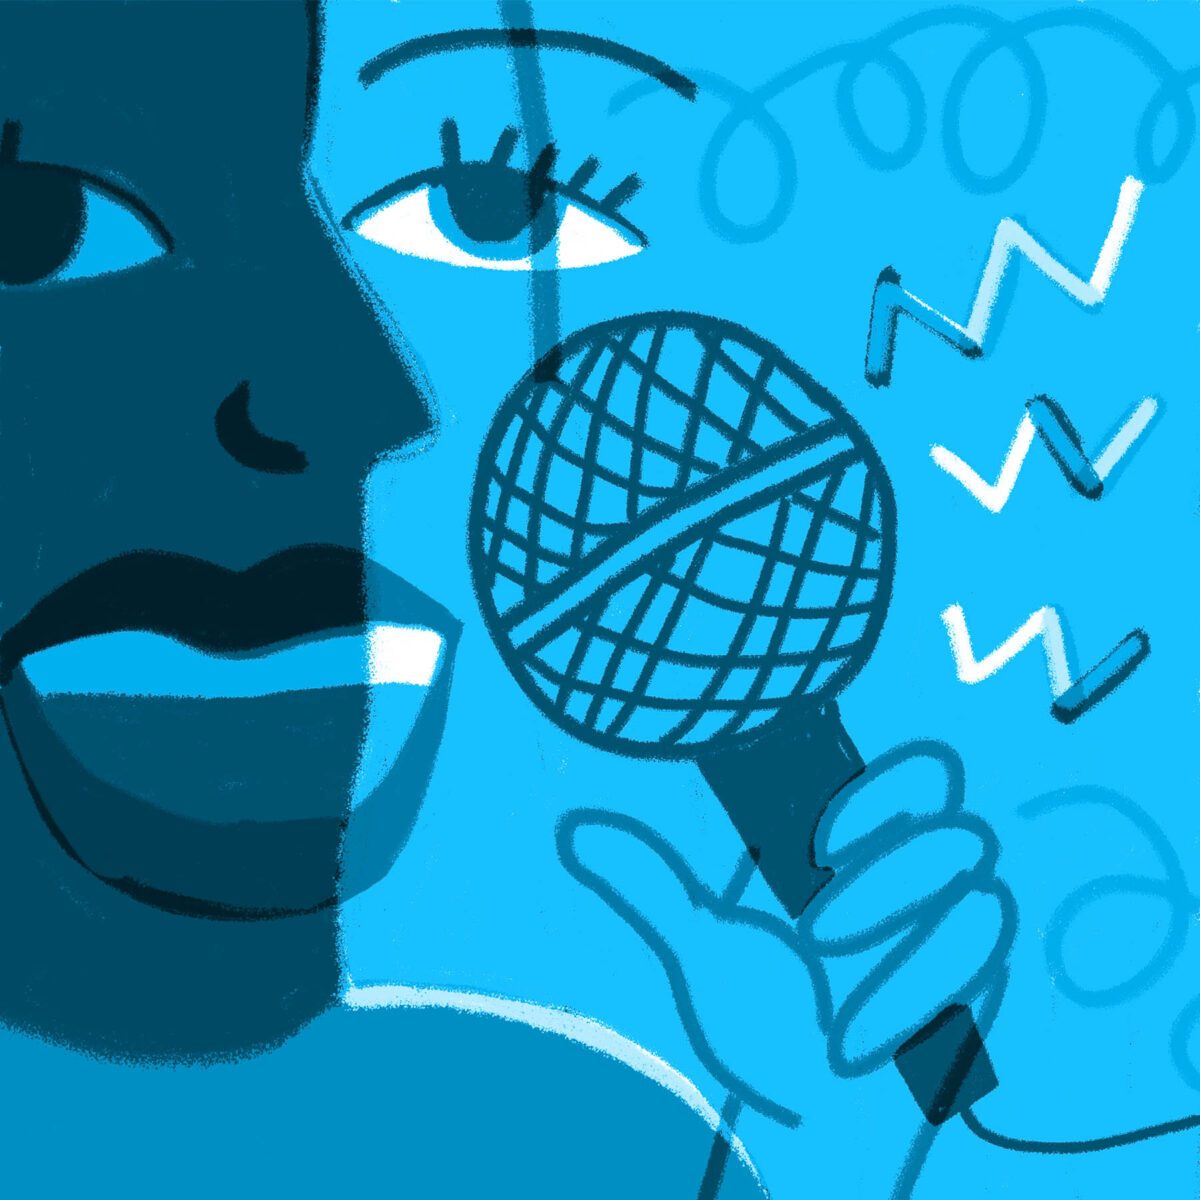 An illustration of a person speaking into a microphone.